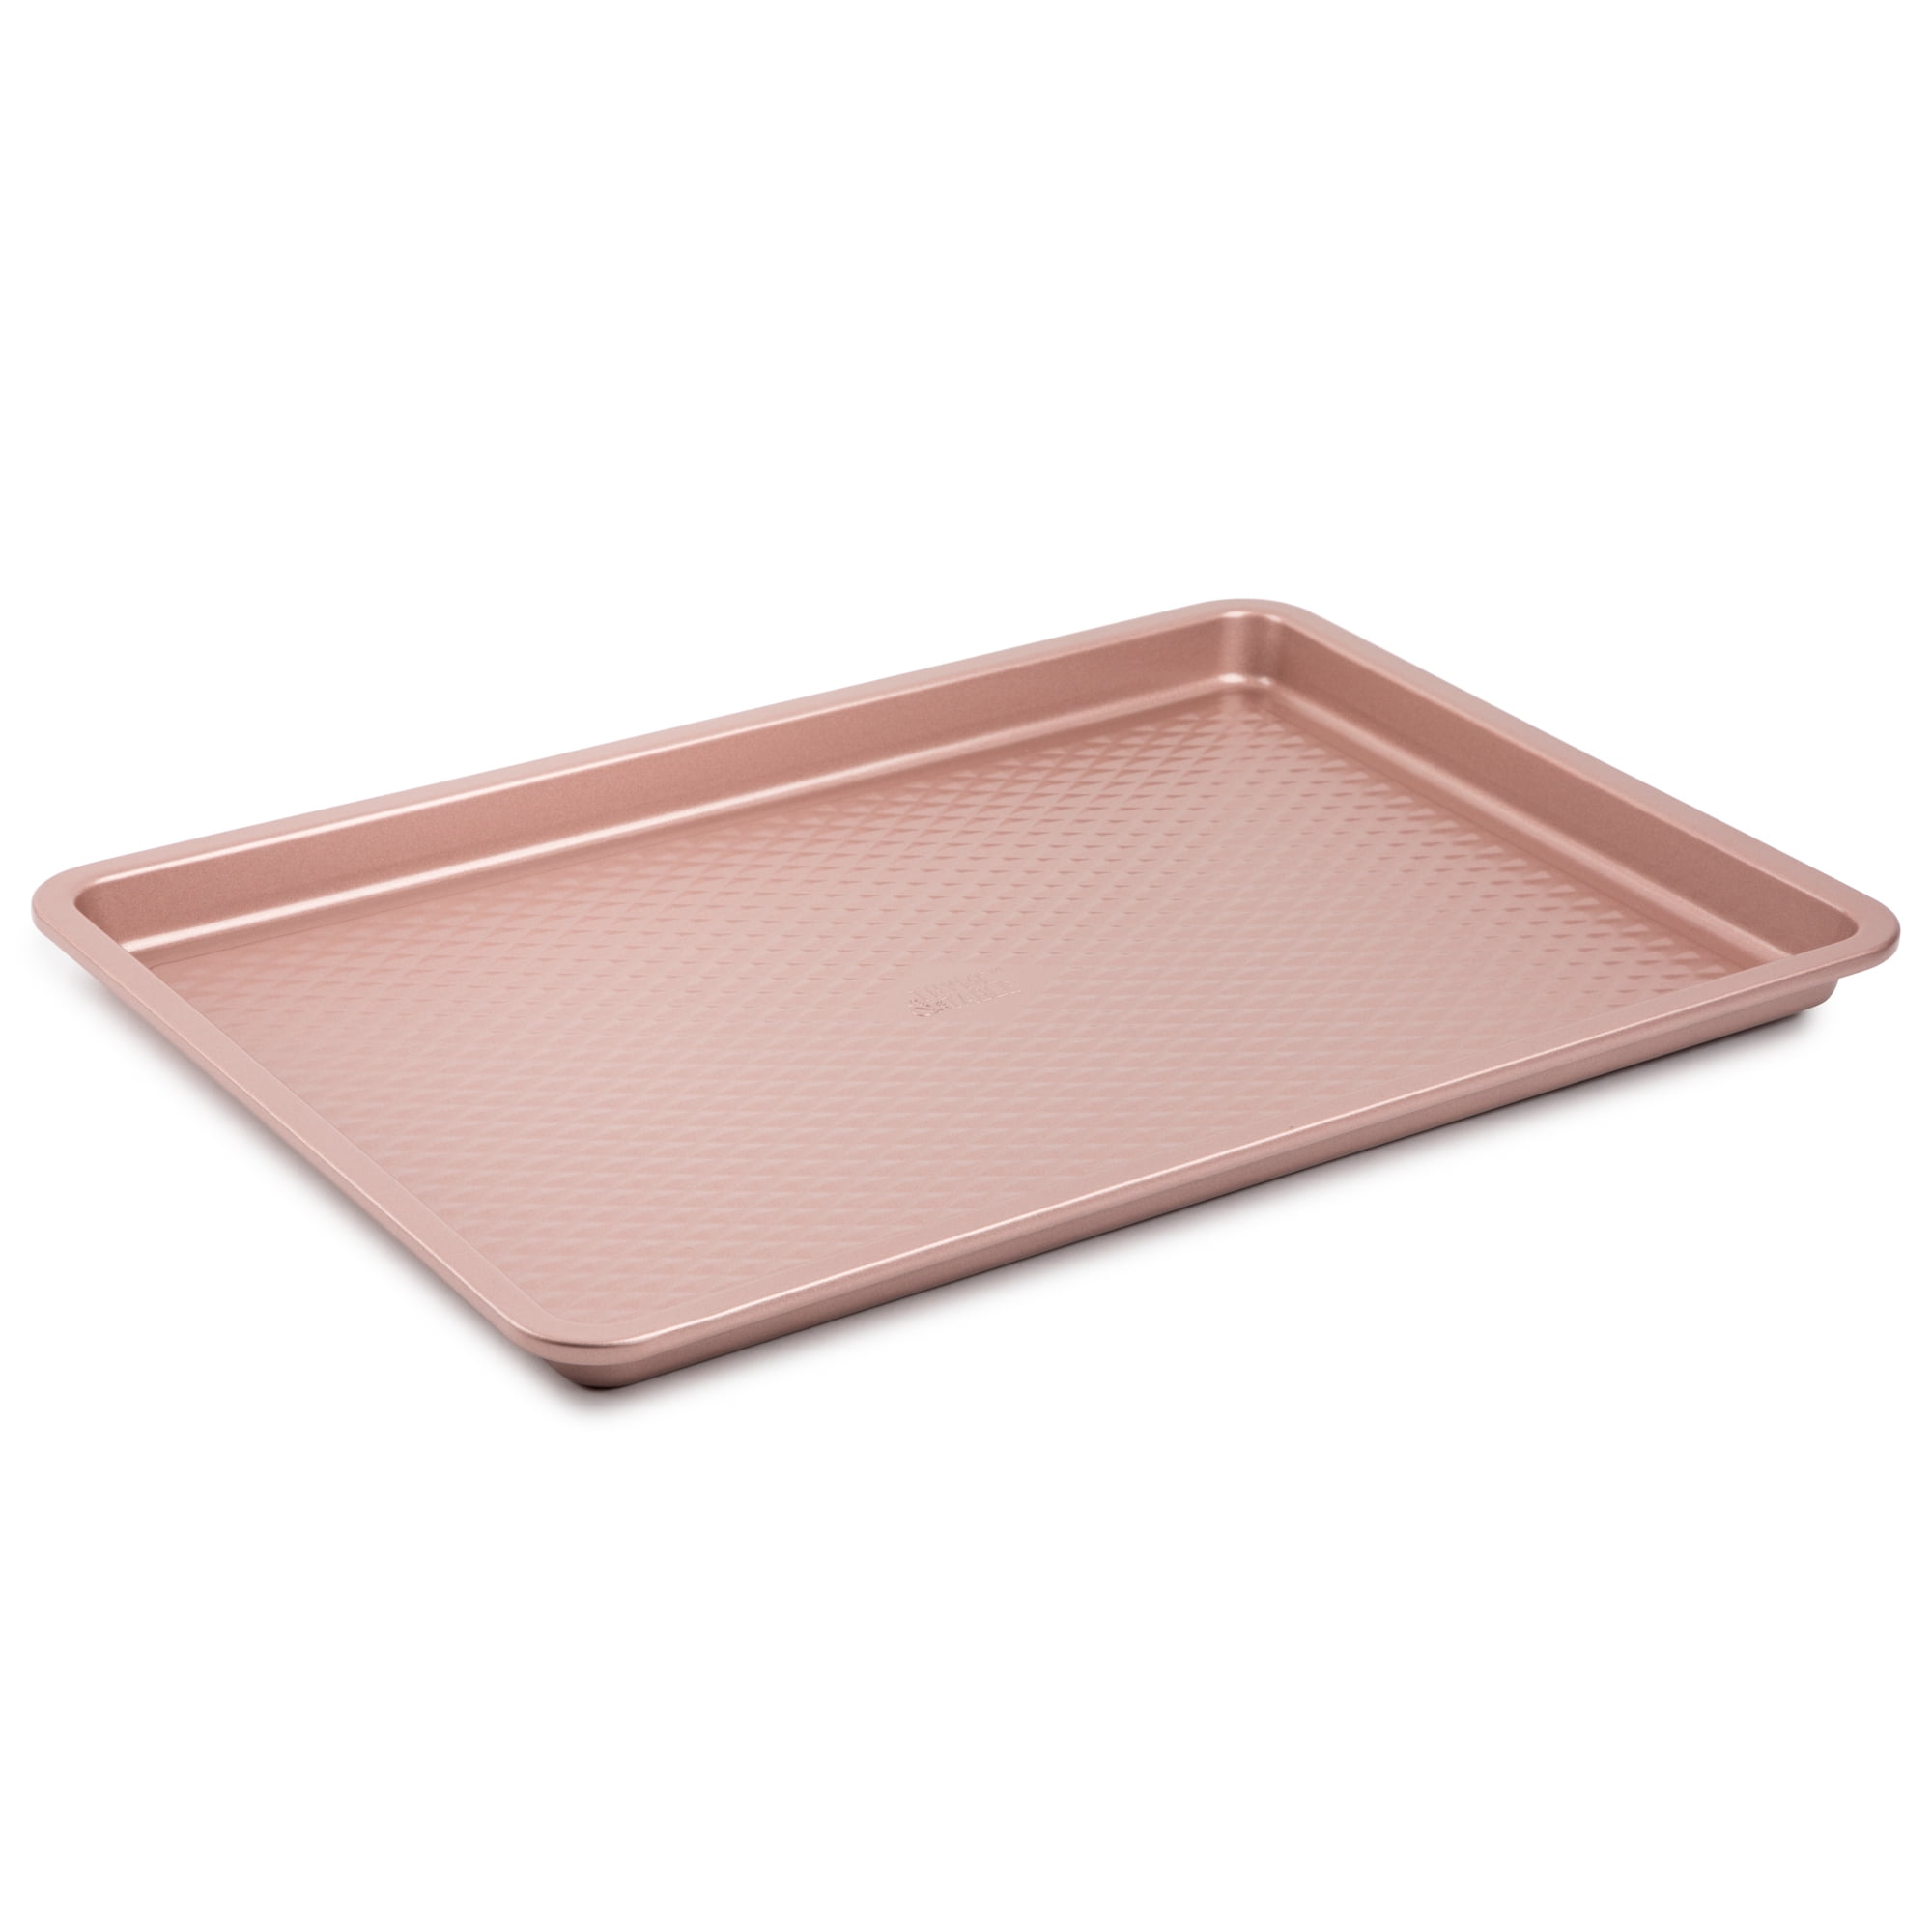 Thyme & Table Non-Stick Cookie Sheet Jelly Roll Pan, 12" x 17", Rose Gold